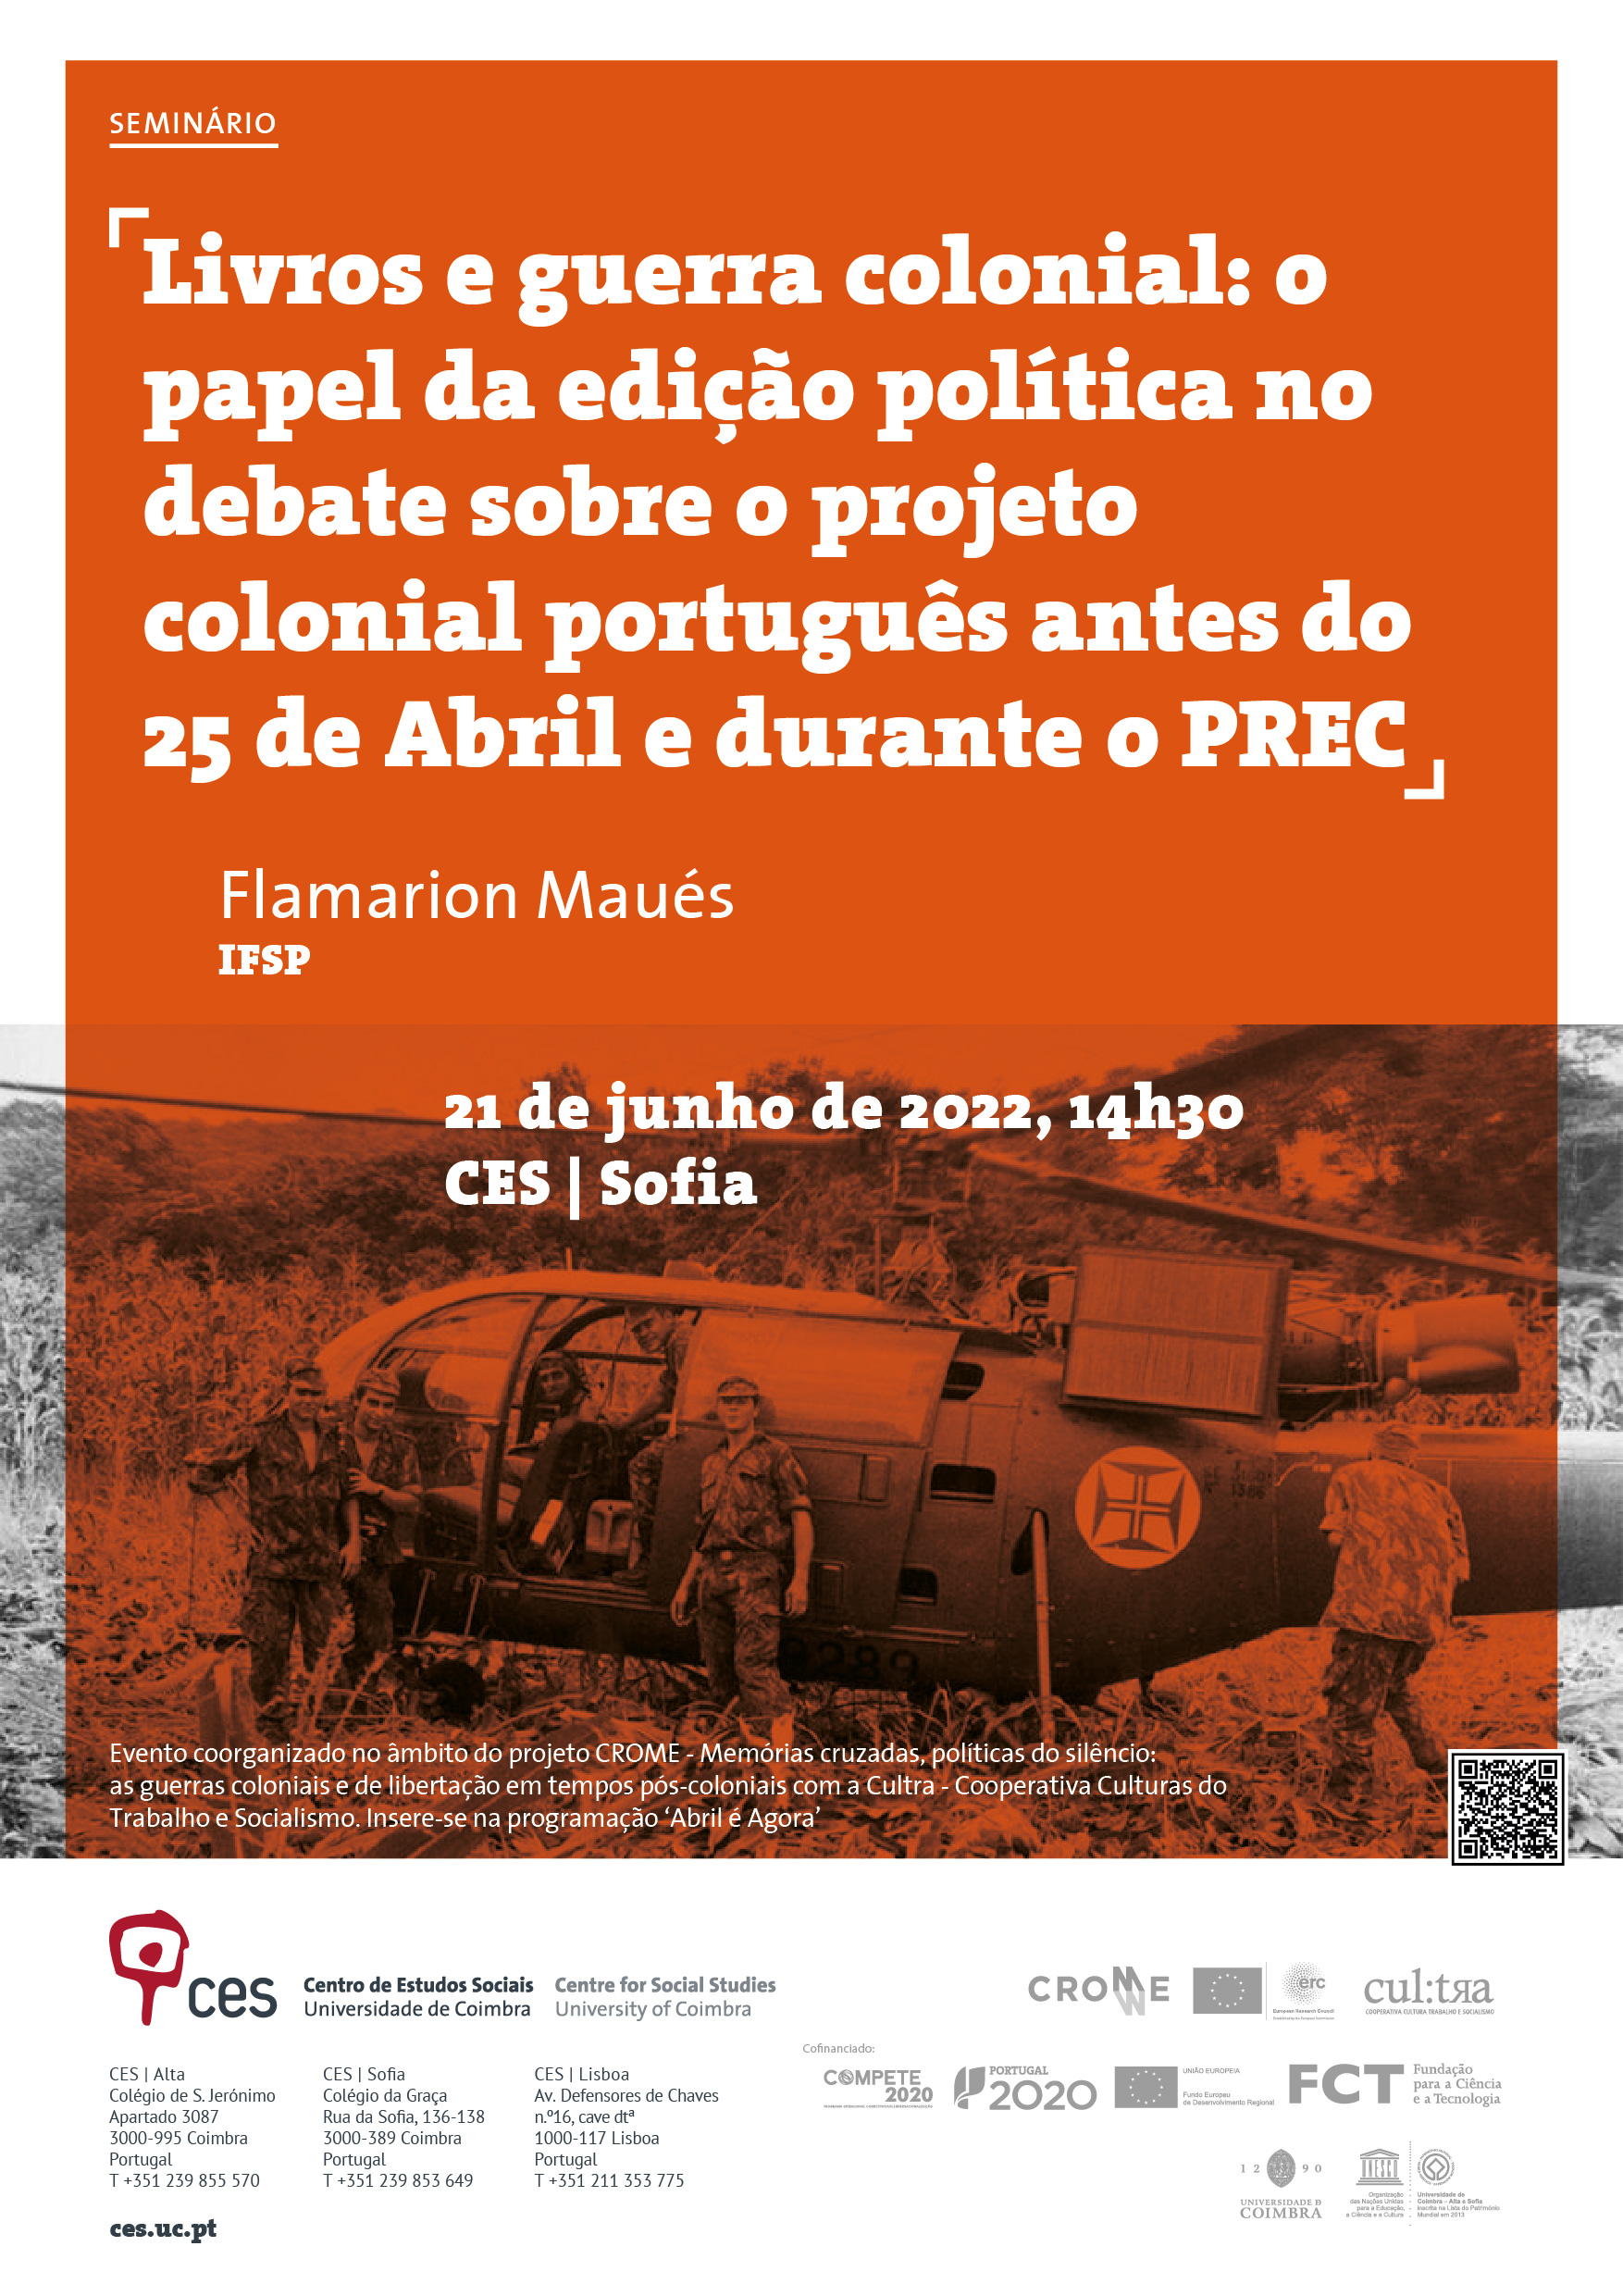 Books and the colonial war: the role of political publishing in the debate on the Portuguese colonial project before April 25th and during the PREC (<em>Ongoing Revolutionary Process</em>)<span id="edit_37992"><script>$(function() { $('#edit_37992').load( "/myces/user/editobj.php?tipo=evento&id=37992" ); });</script></span>